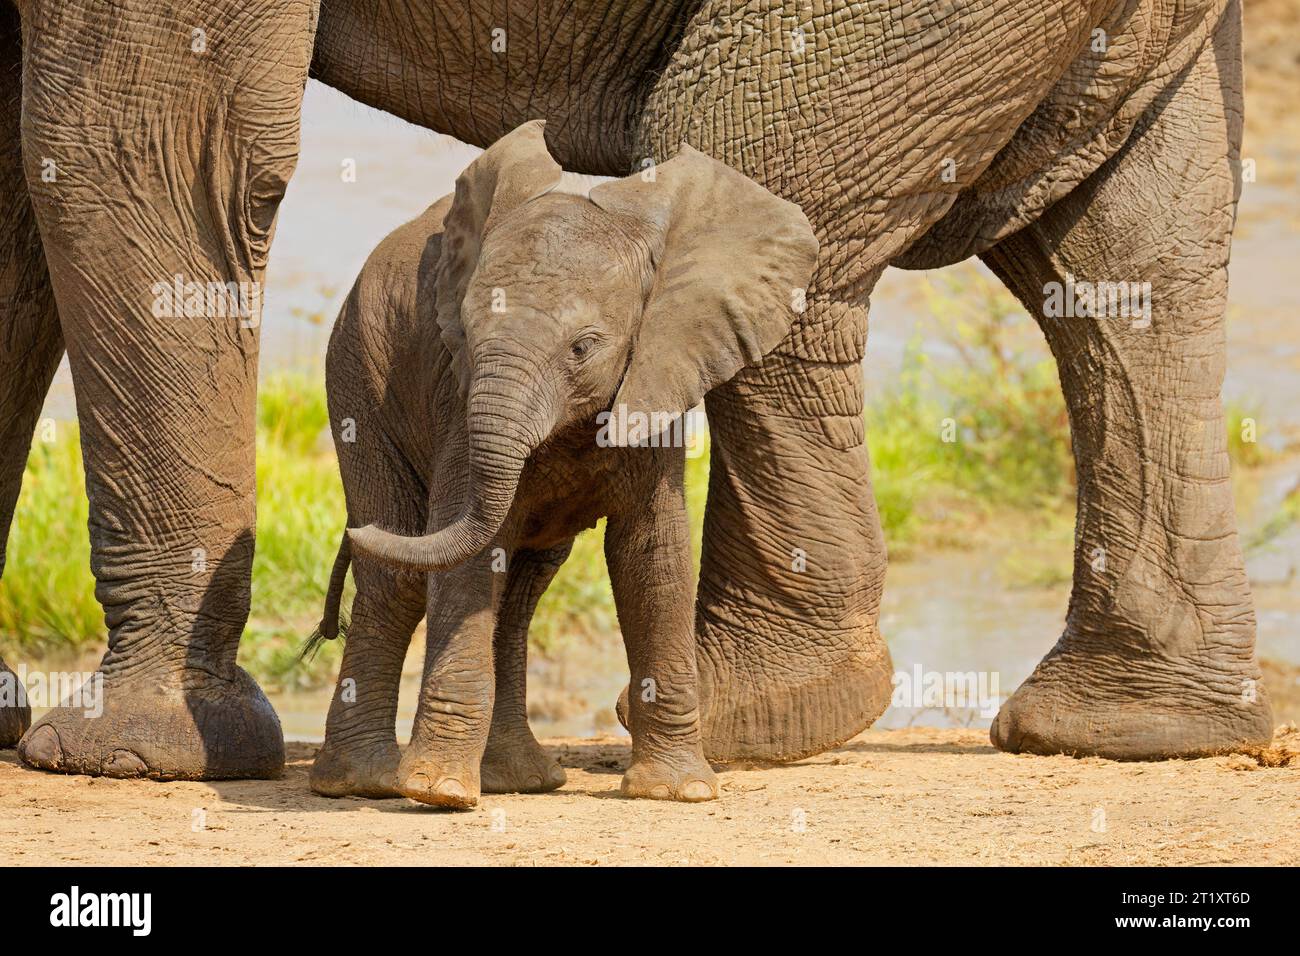 A cute baby African elephant (Loxodonta africana), Kruger National Park, South Africa Stock Photo